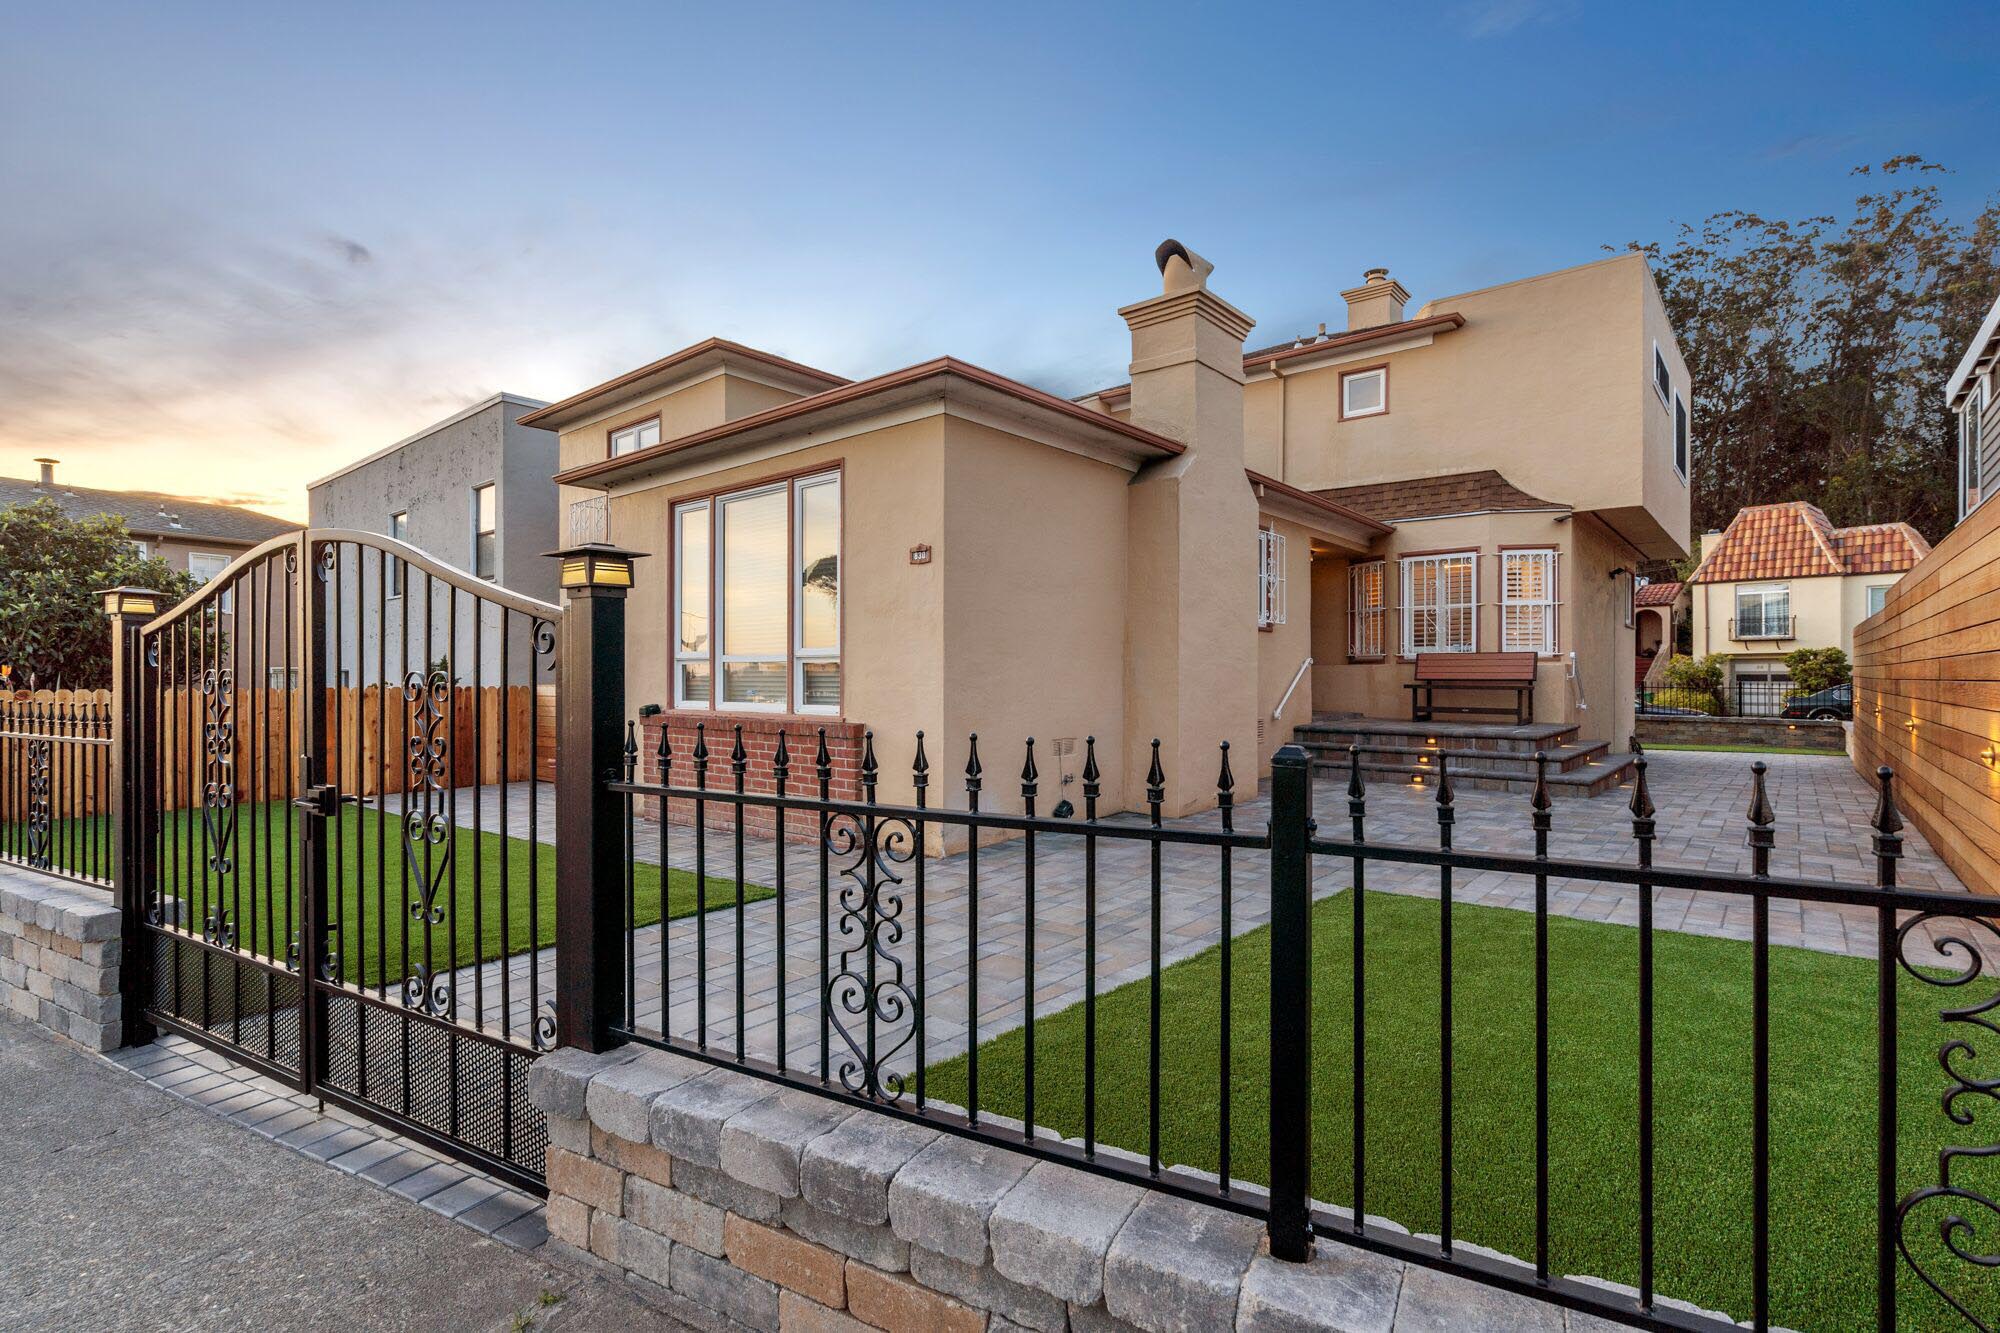 Iron fence and gate, stone pavers entrance and stone steps in a beautiful San Francisco home.